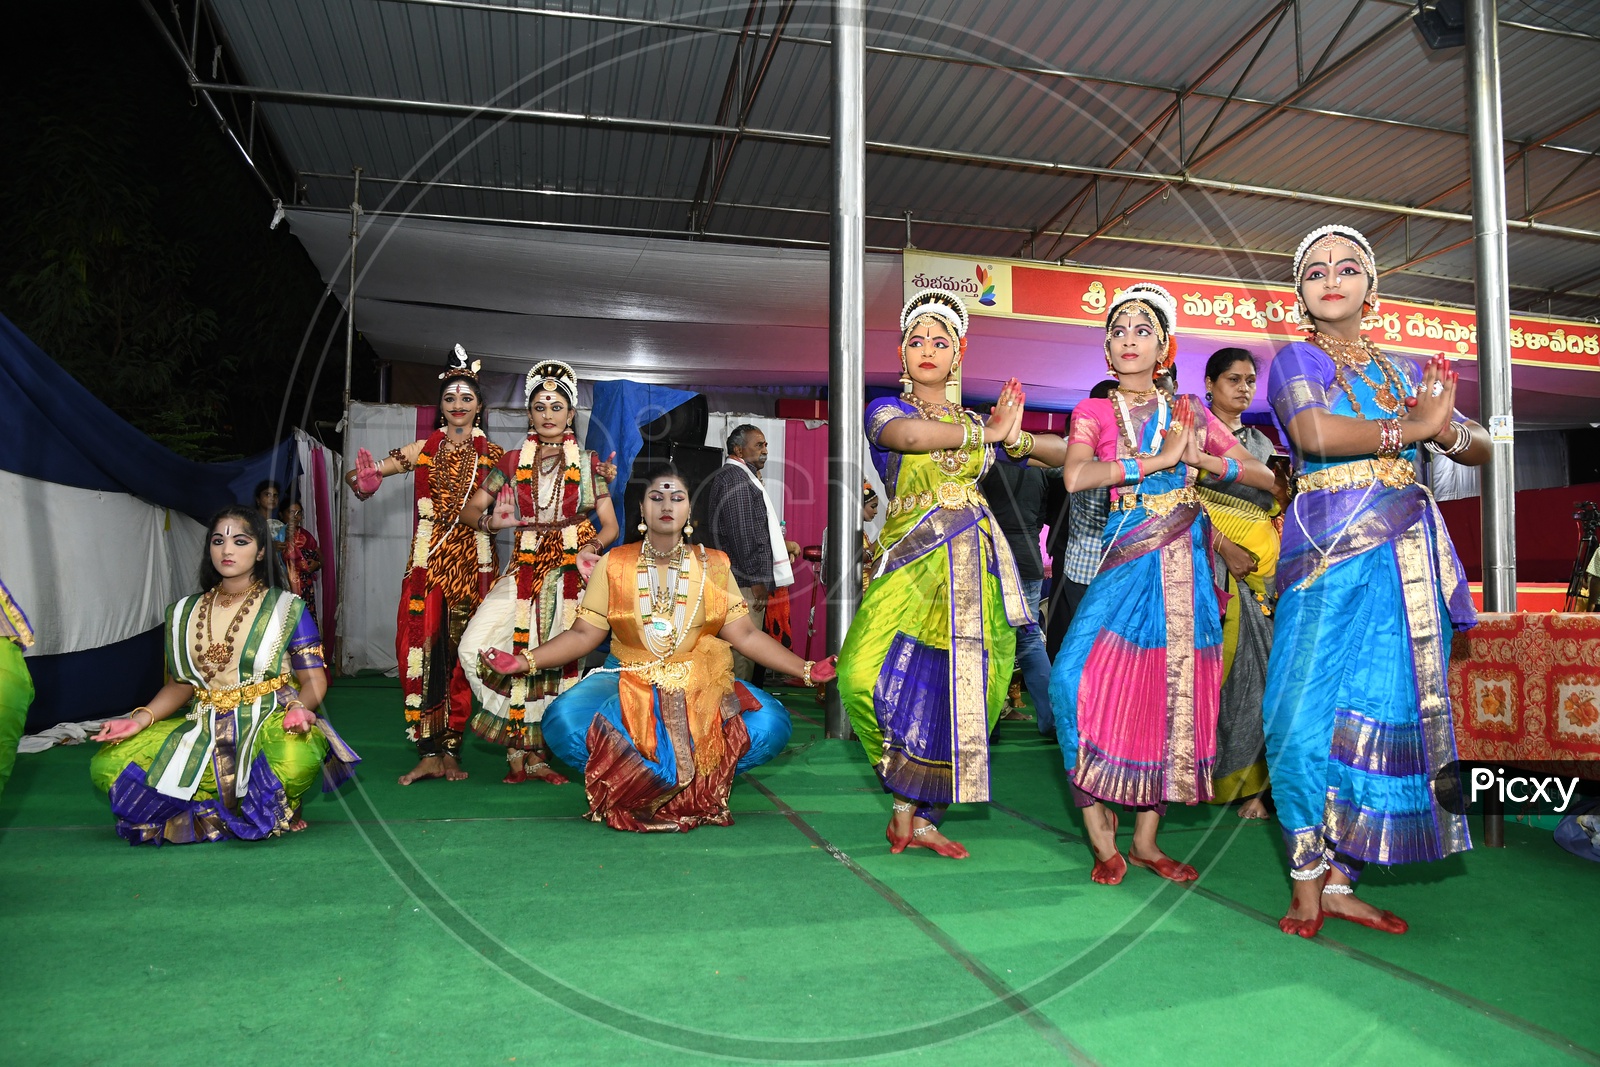 Indian Classical Dancers Performing On Stage At an Cultural Event